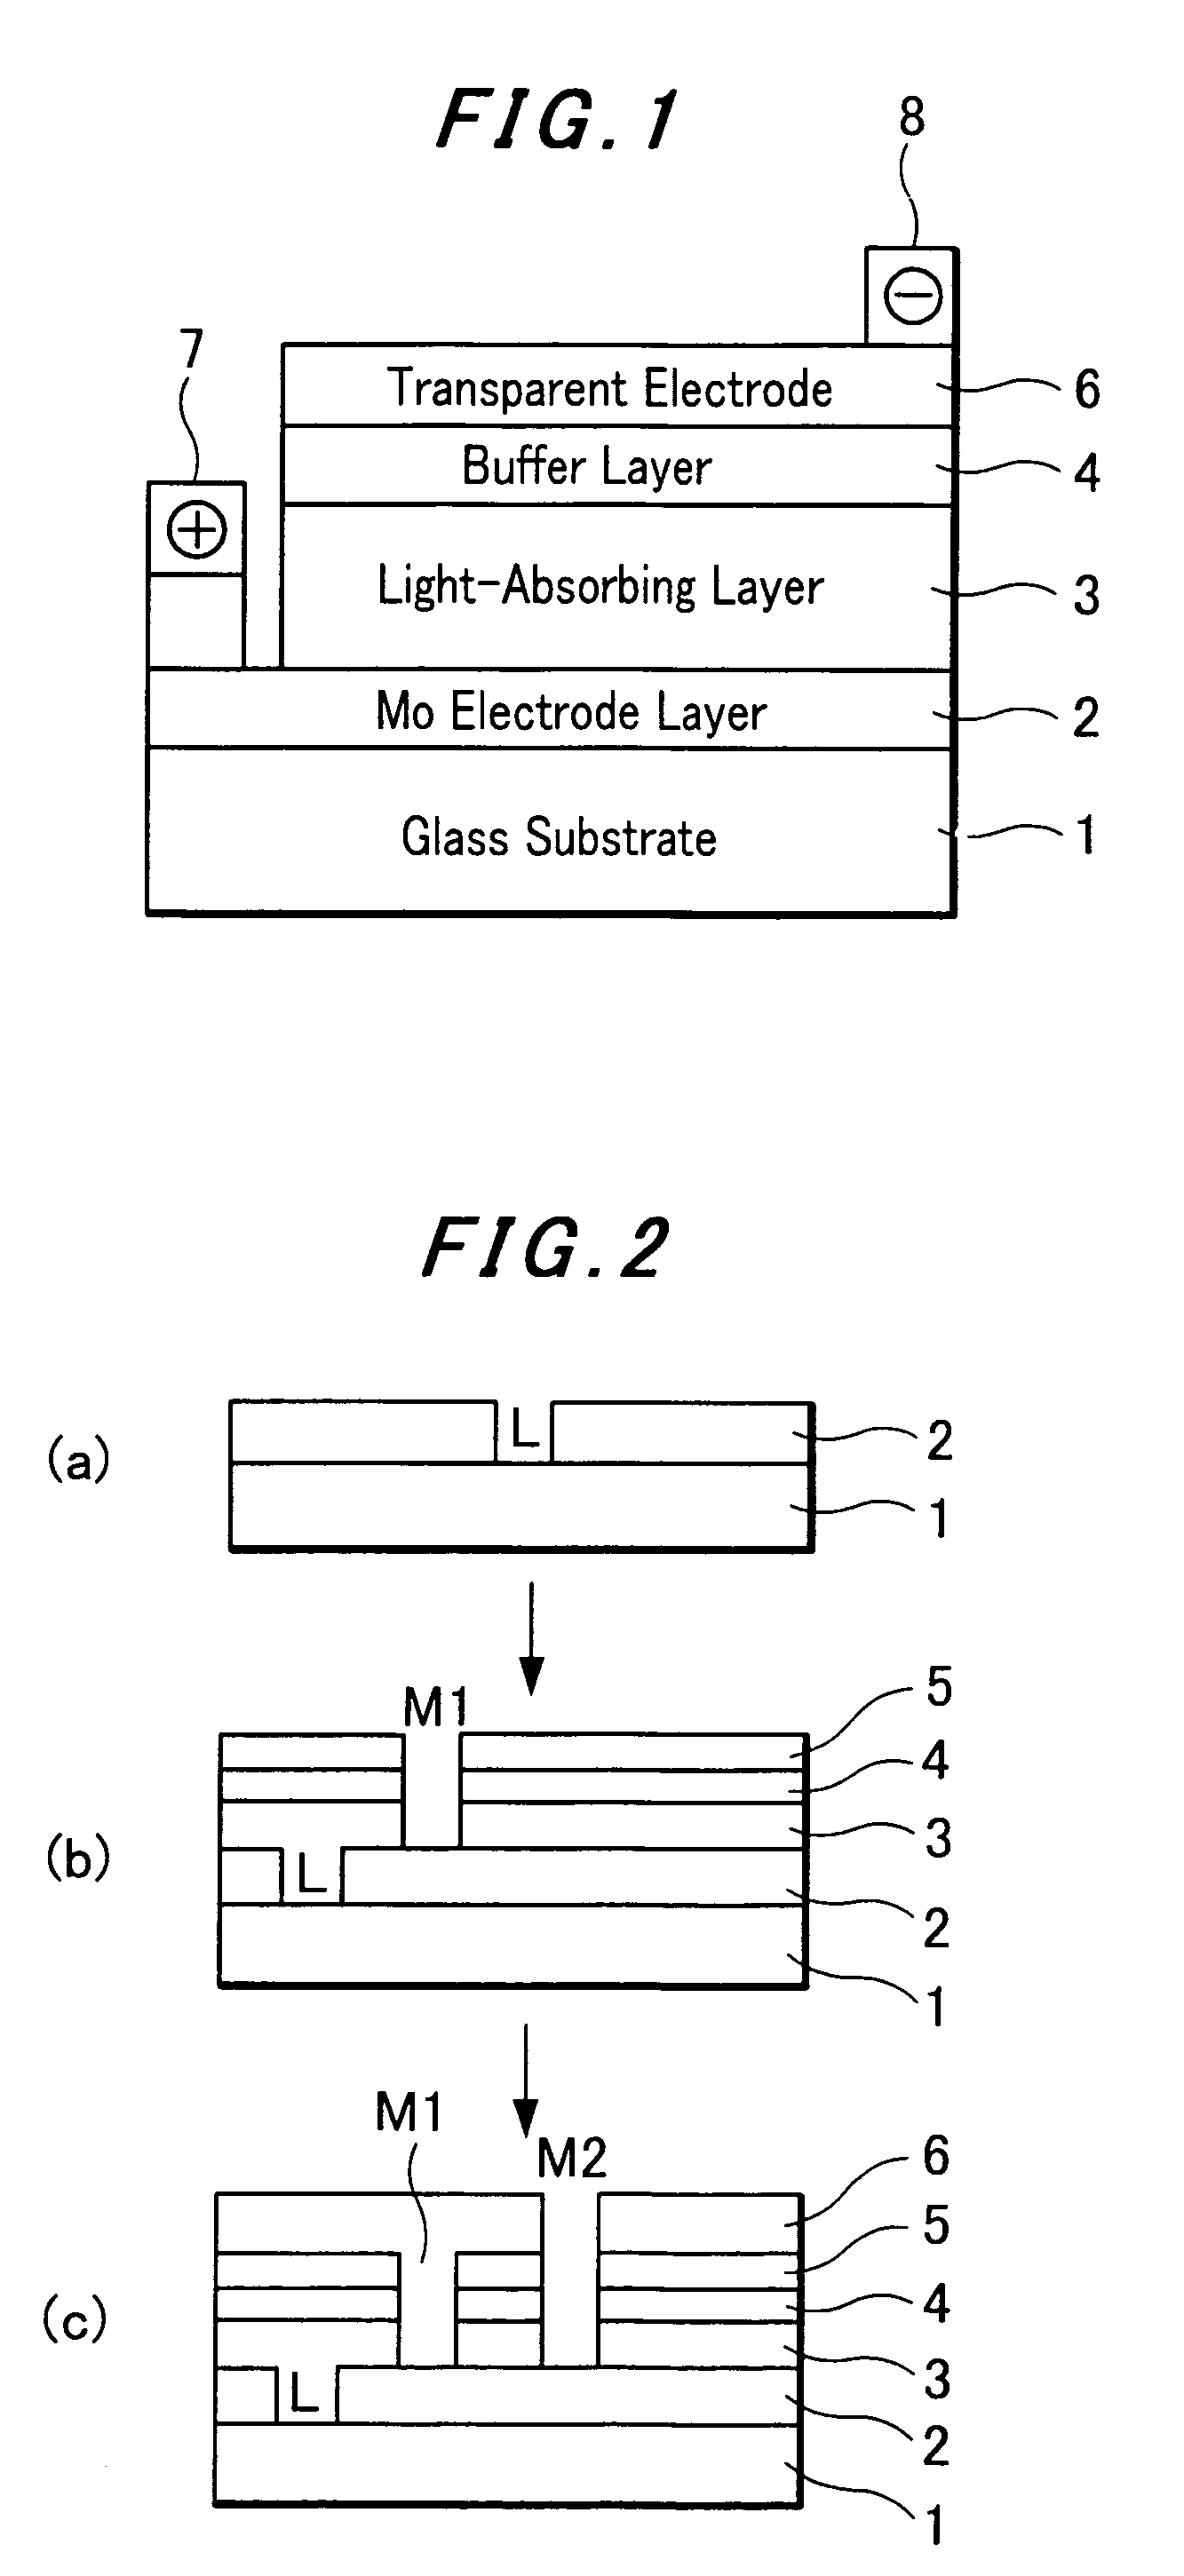 Mechanical scribing apparatus with controlling force of a scribing cutter